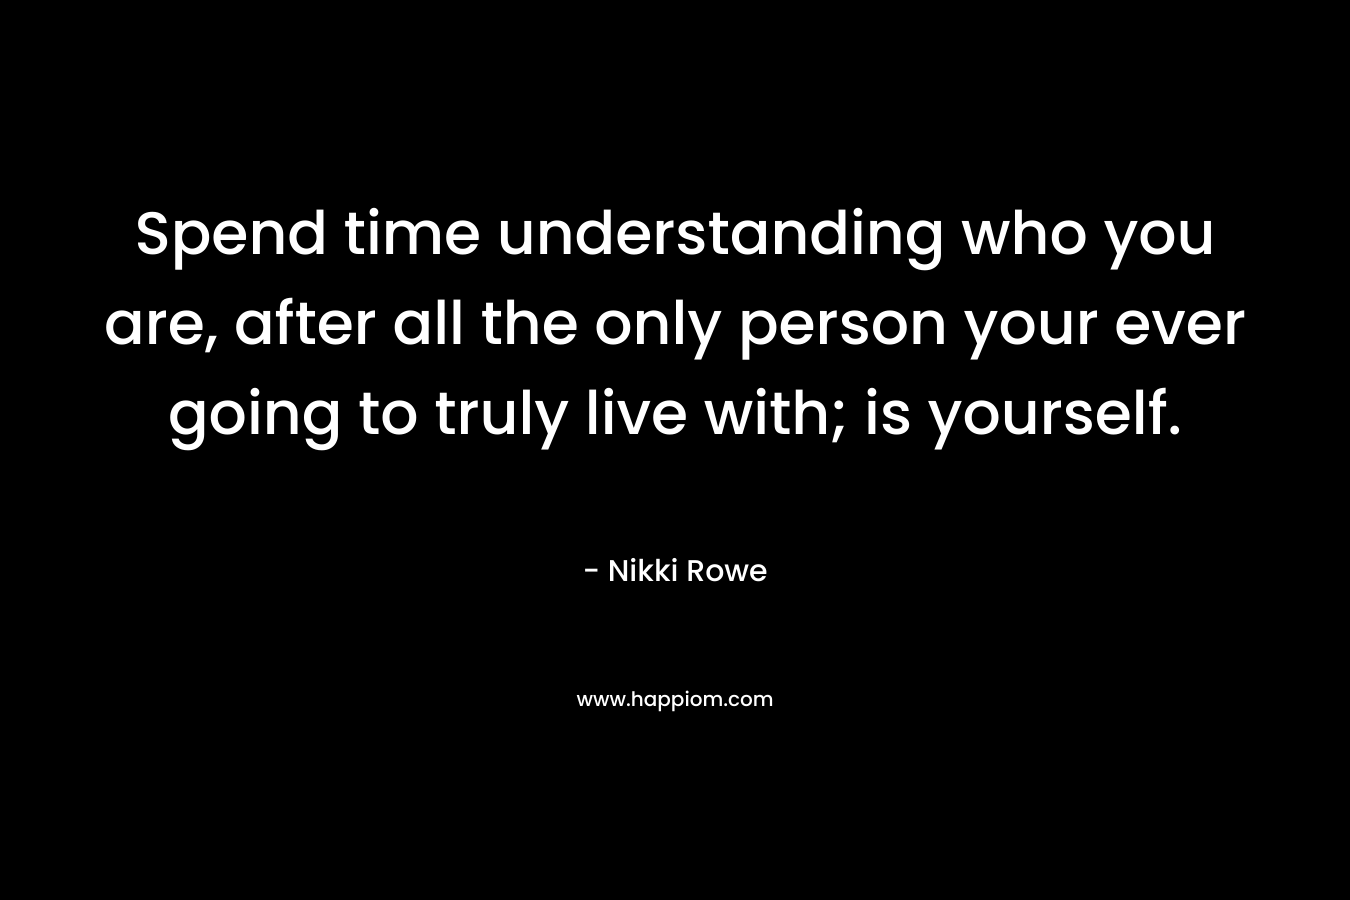 Spend time understanding who you are, after all the only person your ever going to truly live with; is yourself.